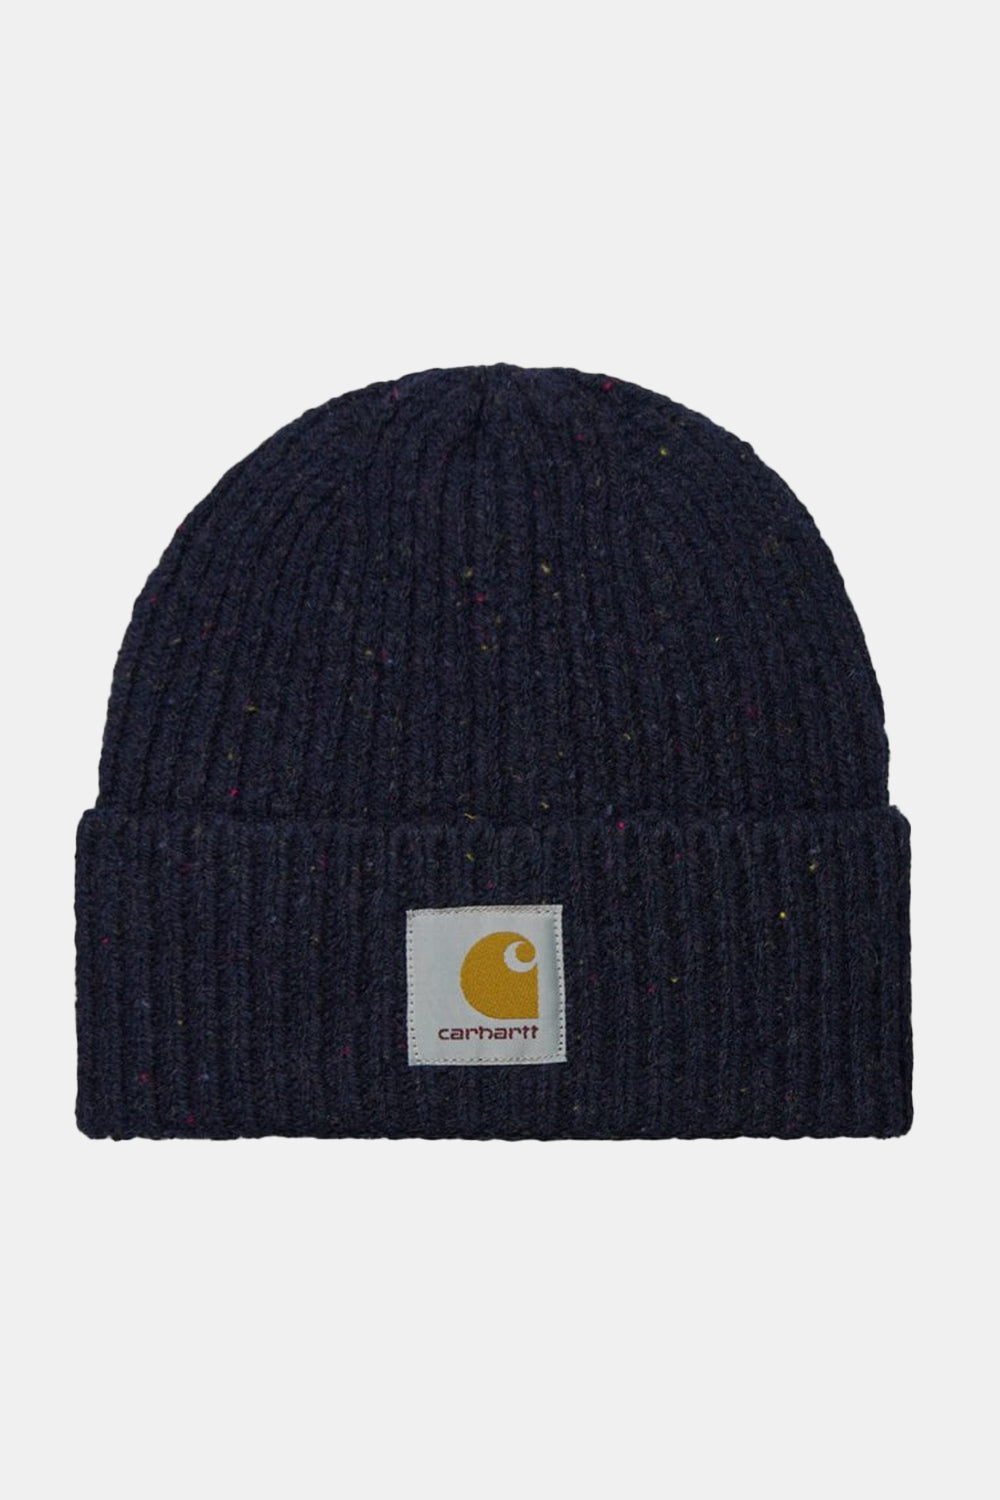 Carhartt WIP Anglistic Beanie (Speckled Dark Navy Heather) | Number Six